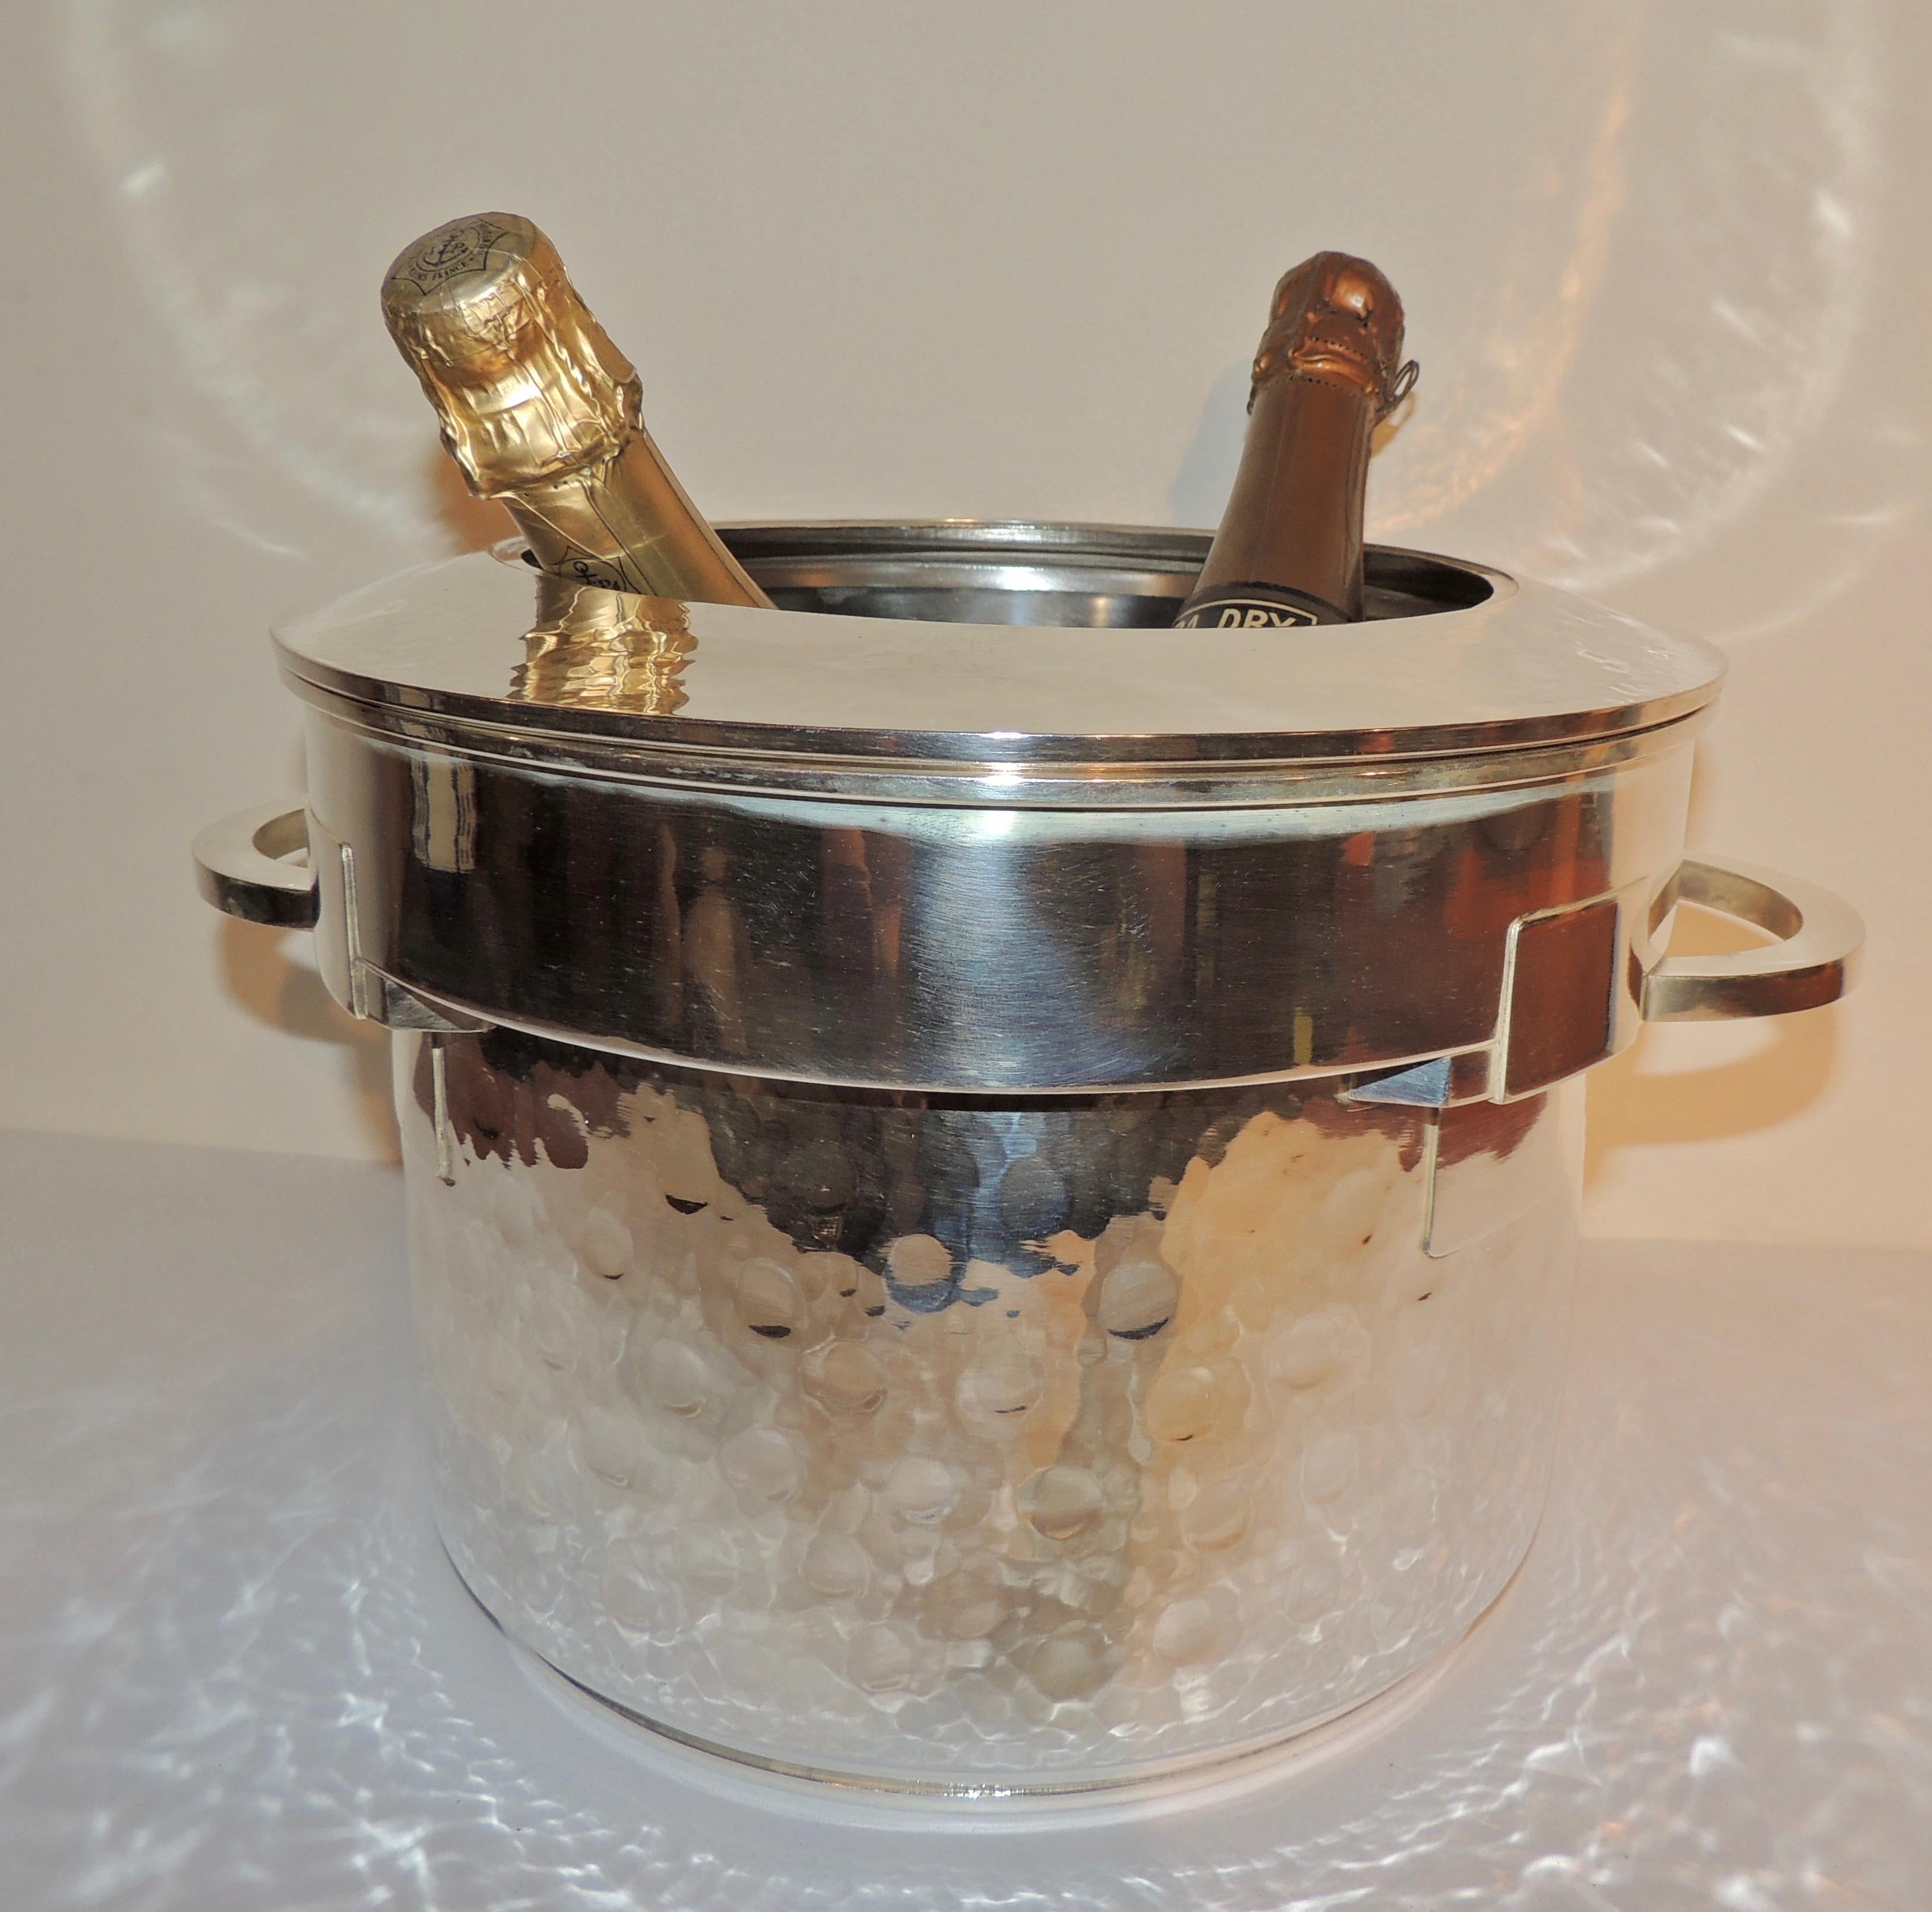 An Art Deco, hand-hammered silver champagne cooler…large enough to hold two or even three bottles with a separate, detachable “ring” of silver that gives it some flexibility in the number of bottles that can be nestled in it. The decorative element